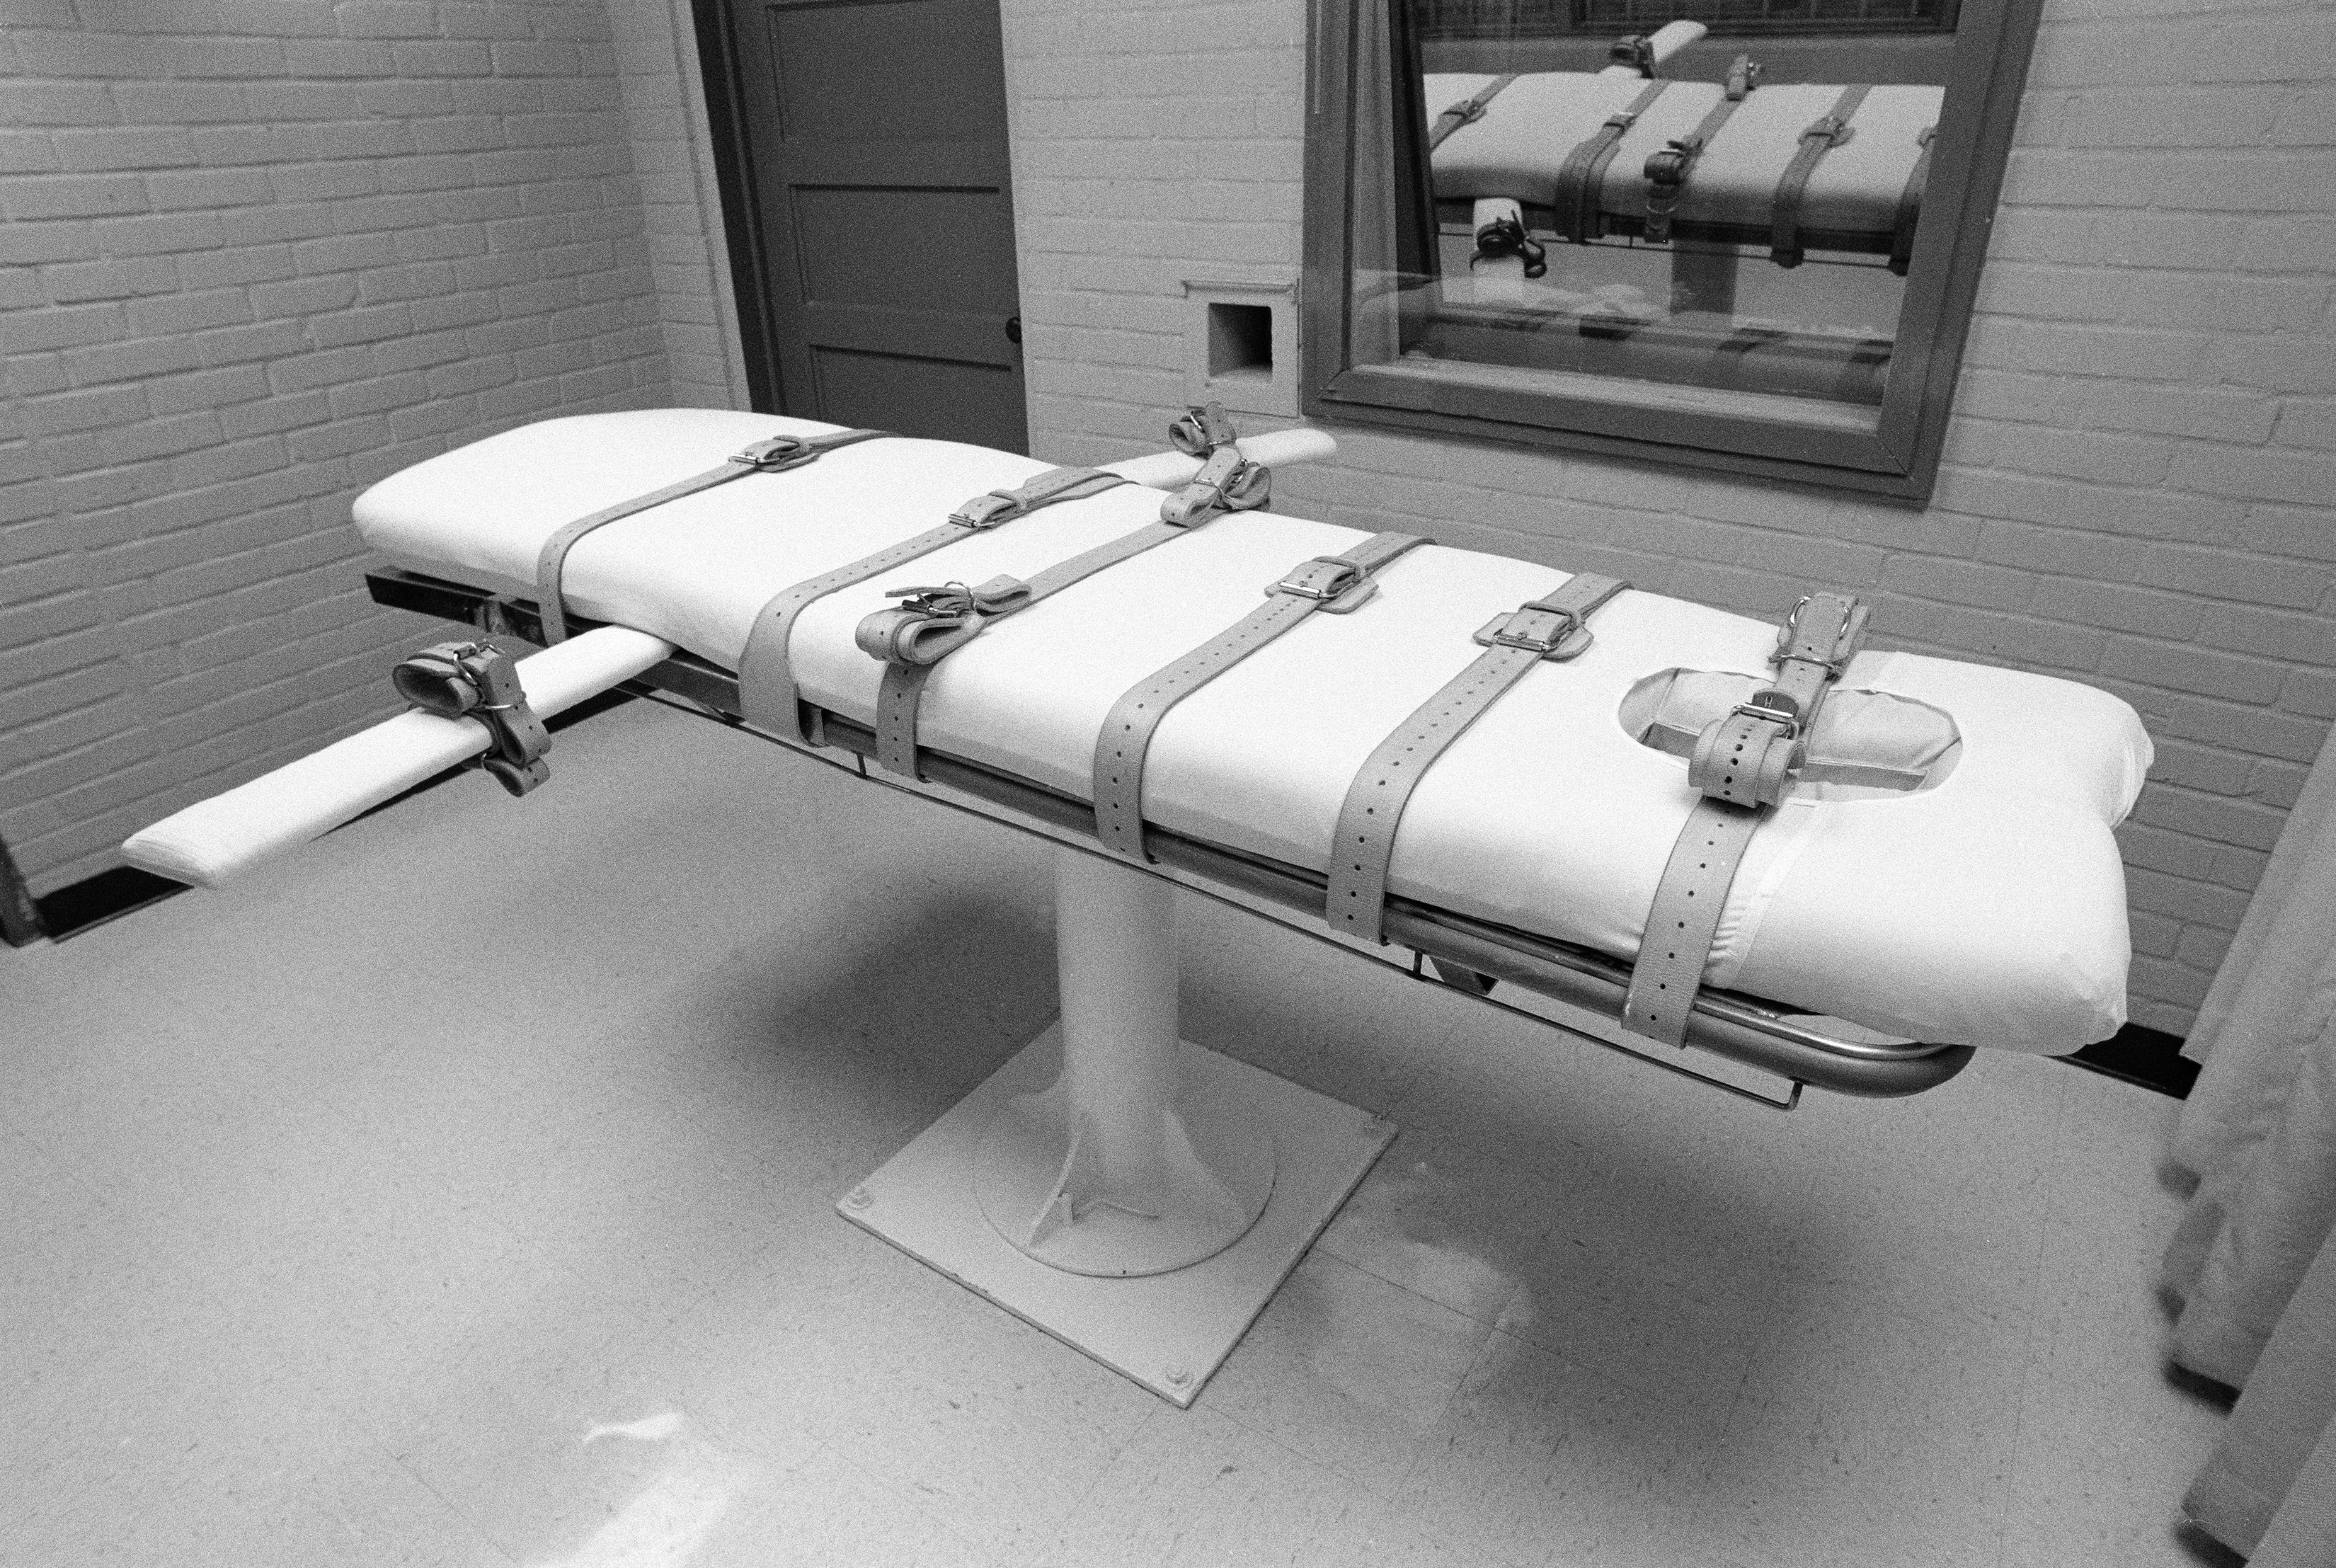 New Execution Method Touted as More 'Humane,' but Evidence Is Lacking